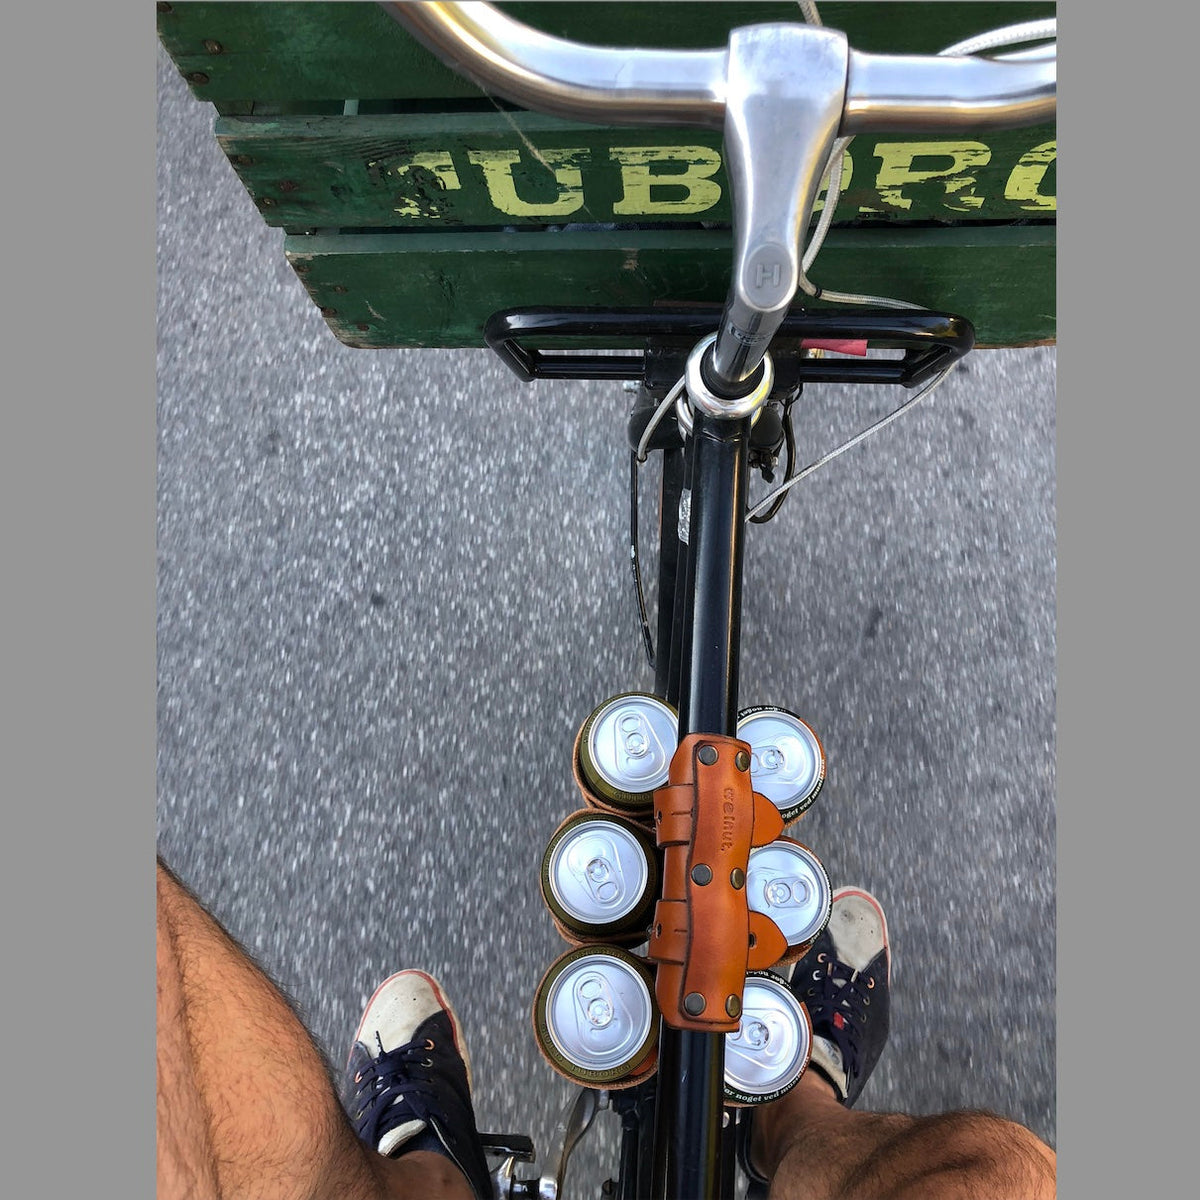 Customer photo looking down on the top tube of a bicycle from the saddle with their feet on the pedals. The street below is in motion and the top tube is holding a 6-pack of beer with a leather carrying strap